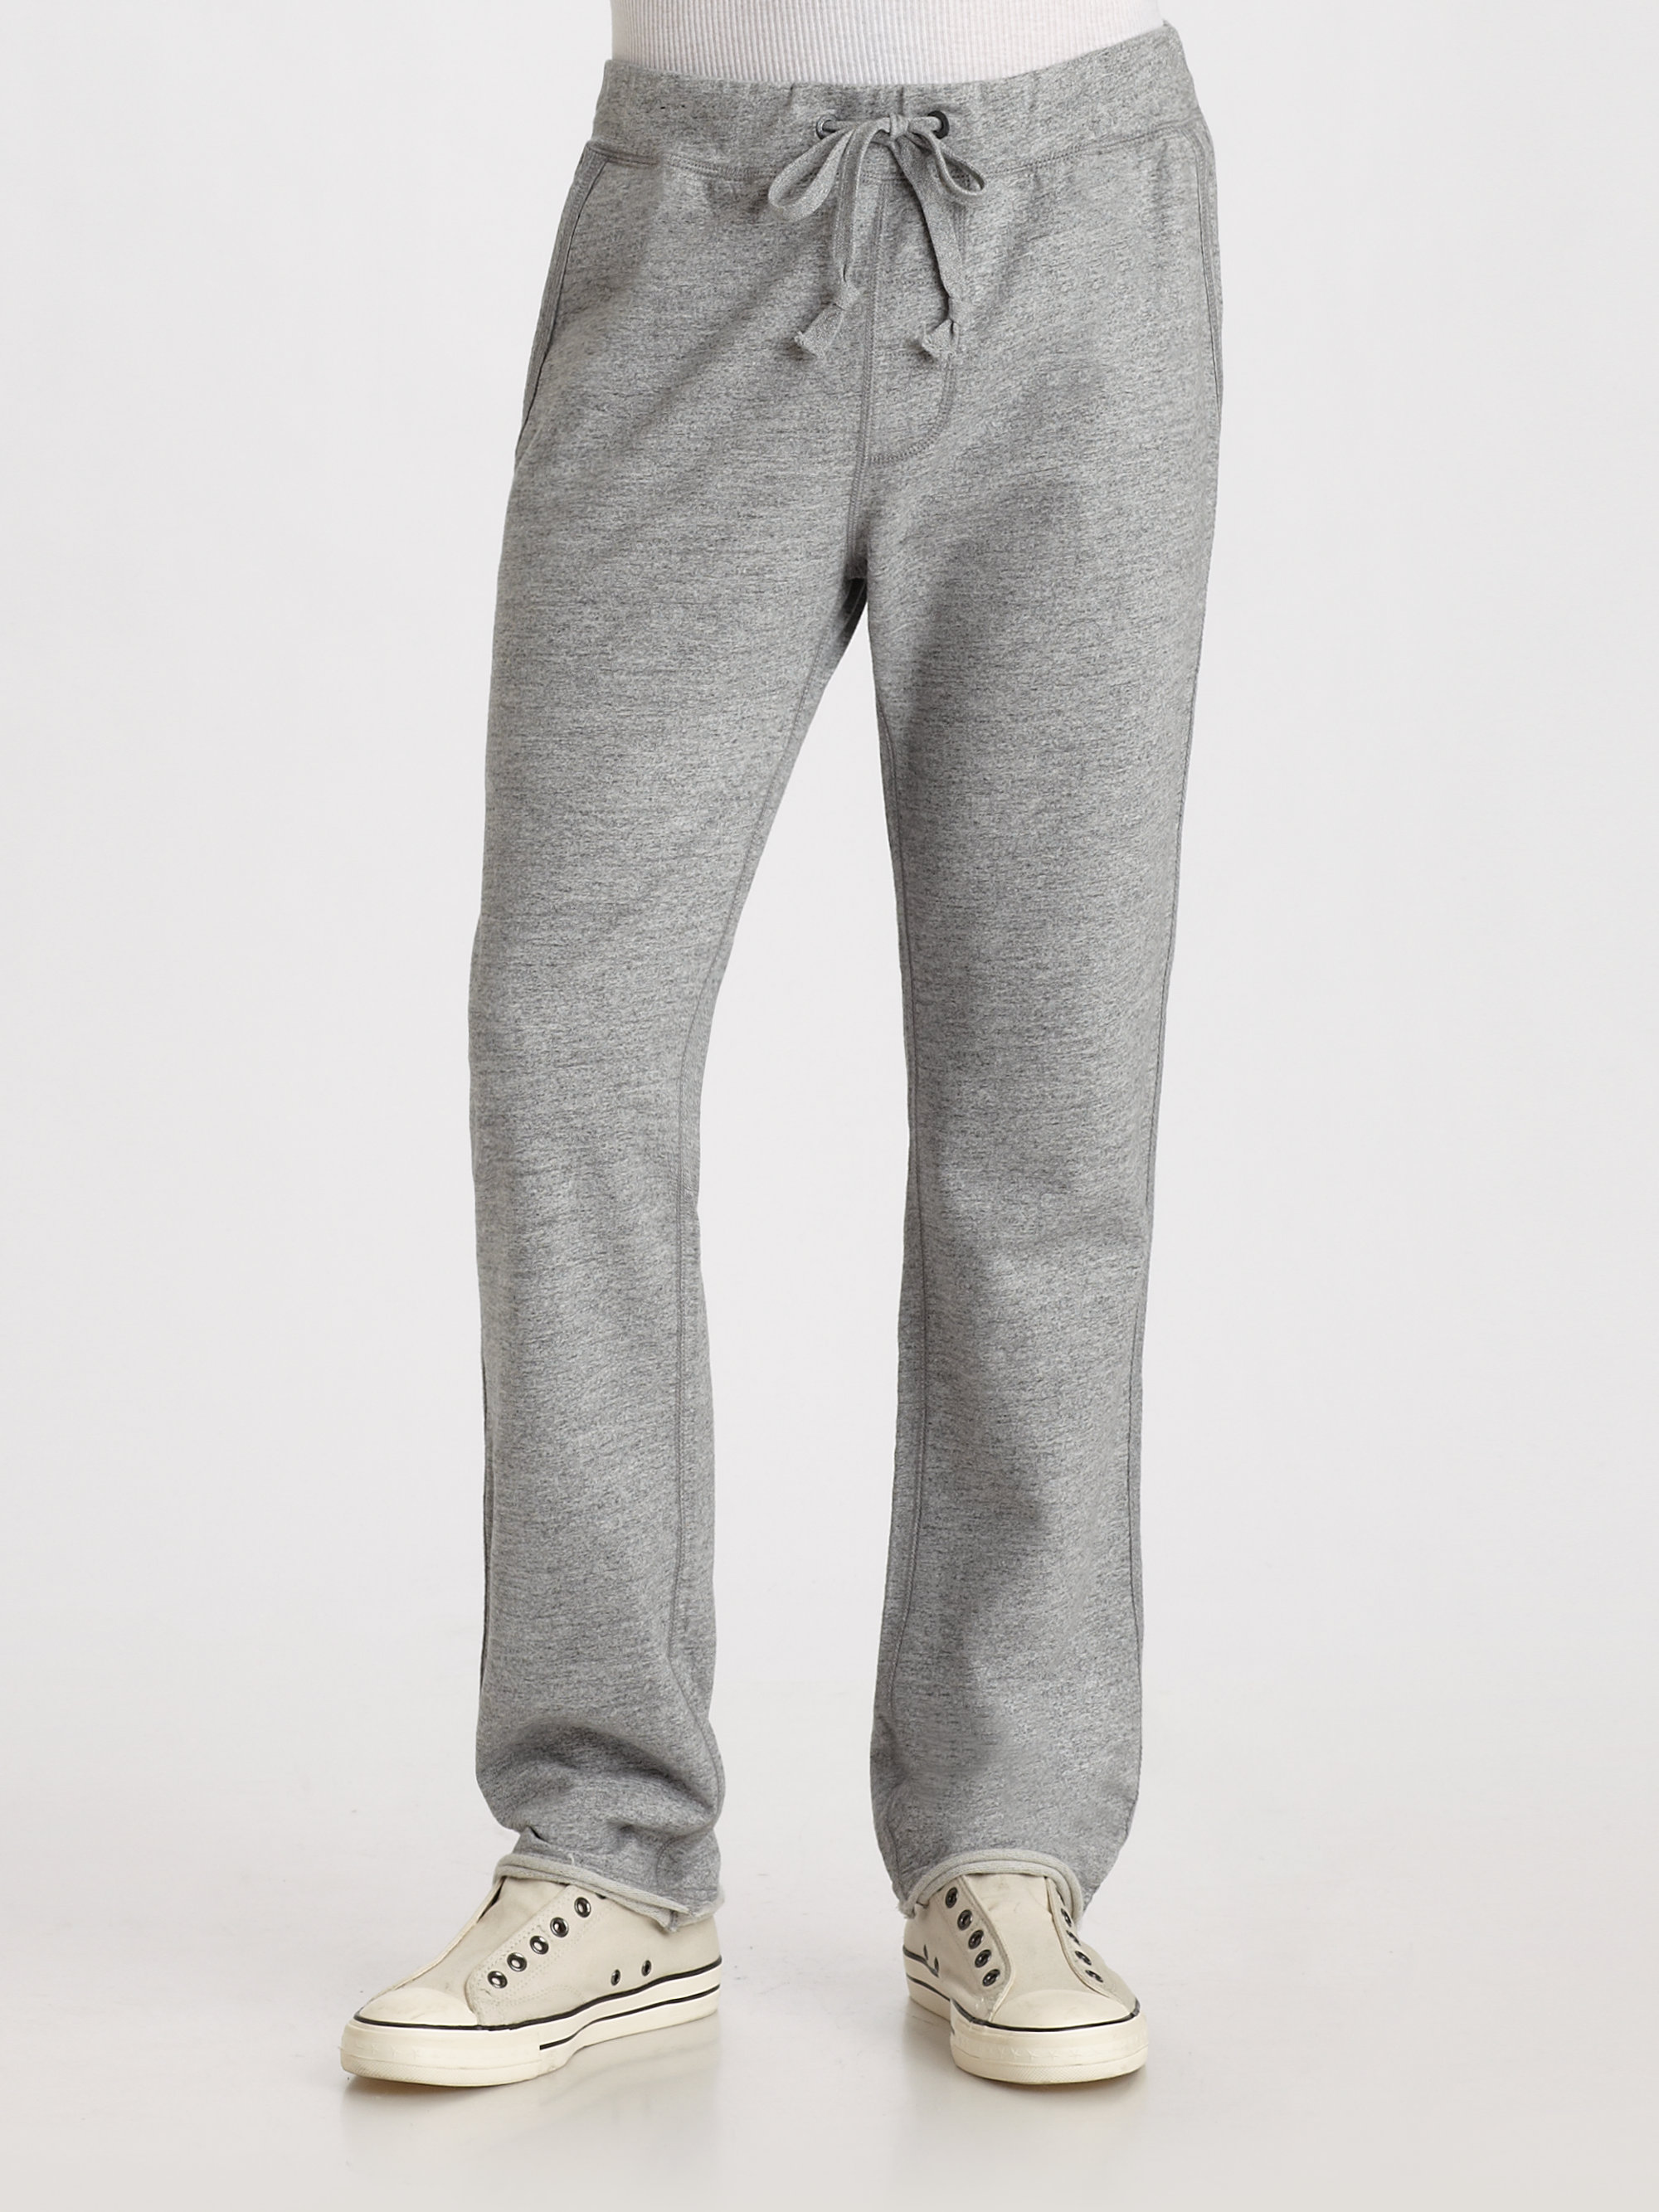 Lyst - Converse French Terry Jog Pants in Gray for Men